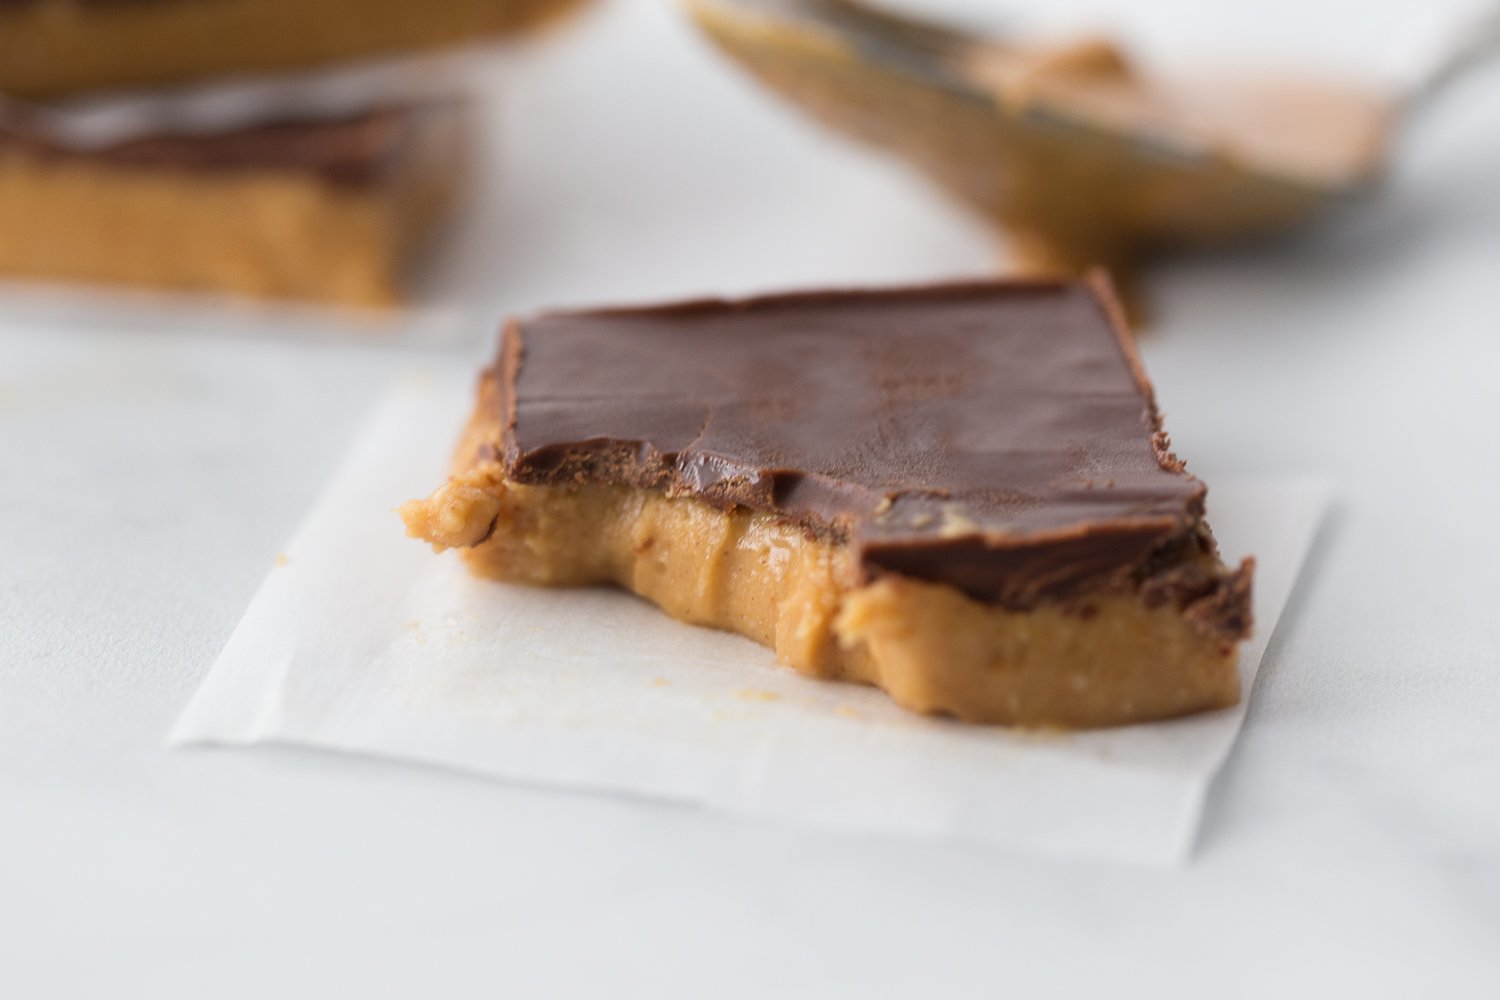 lazy keto meals - no bake peanut butter bar on wax paper with a bite taken out